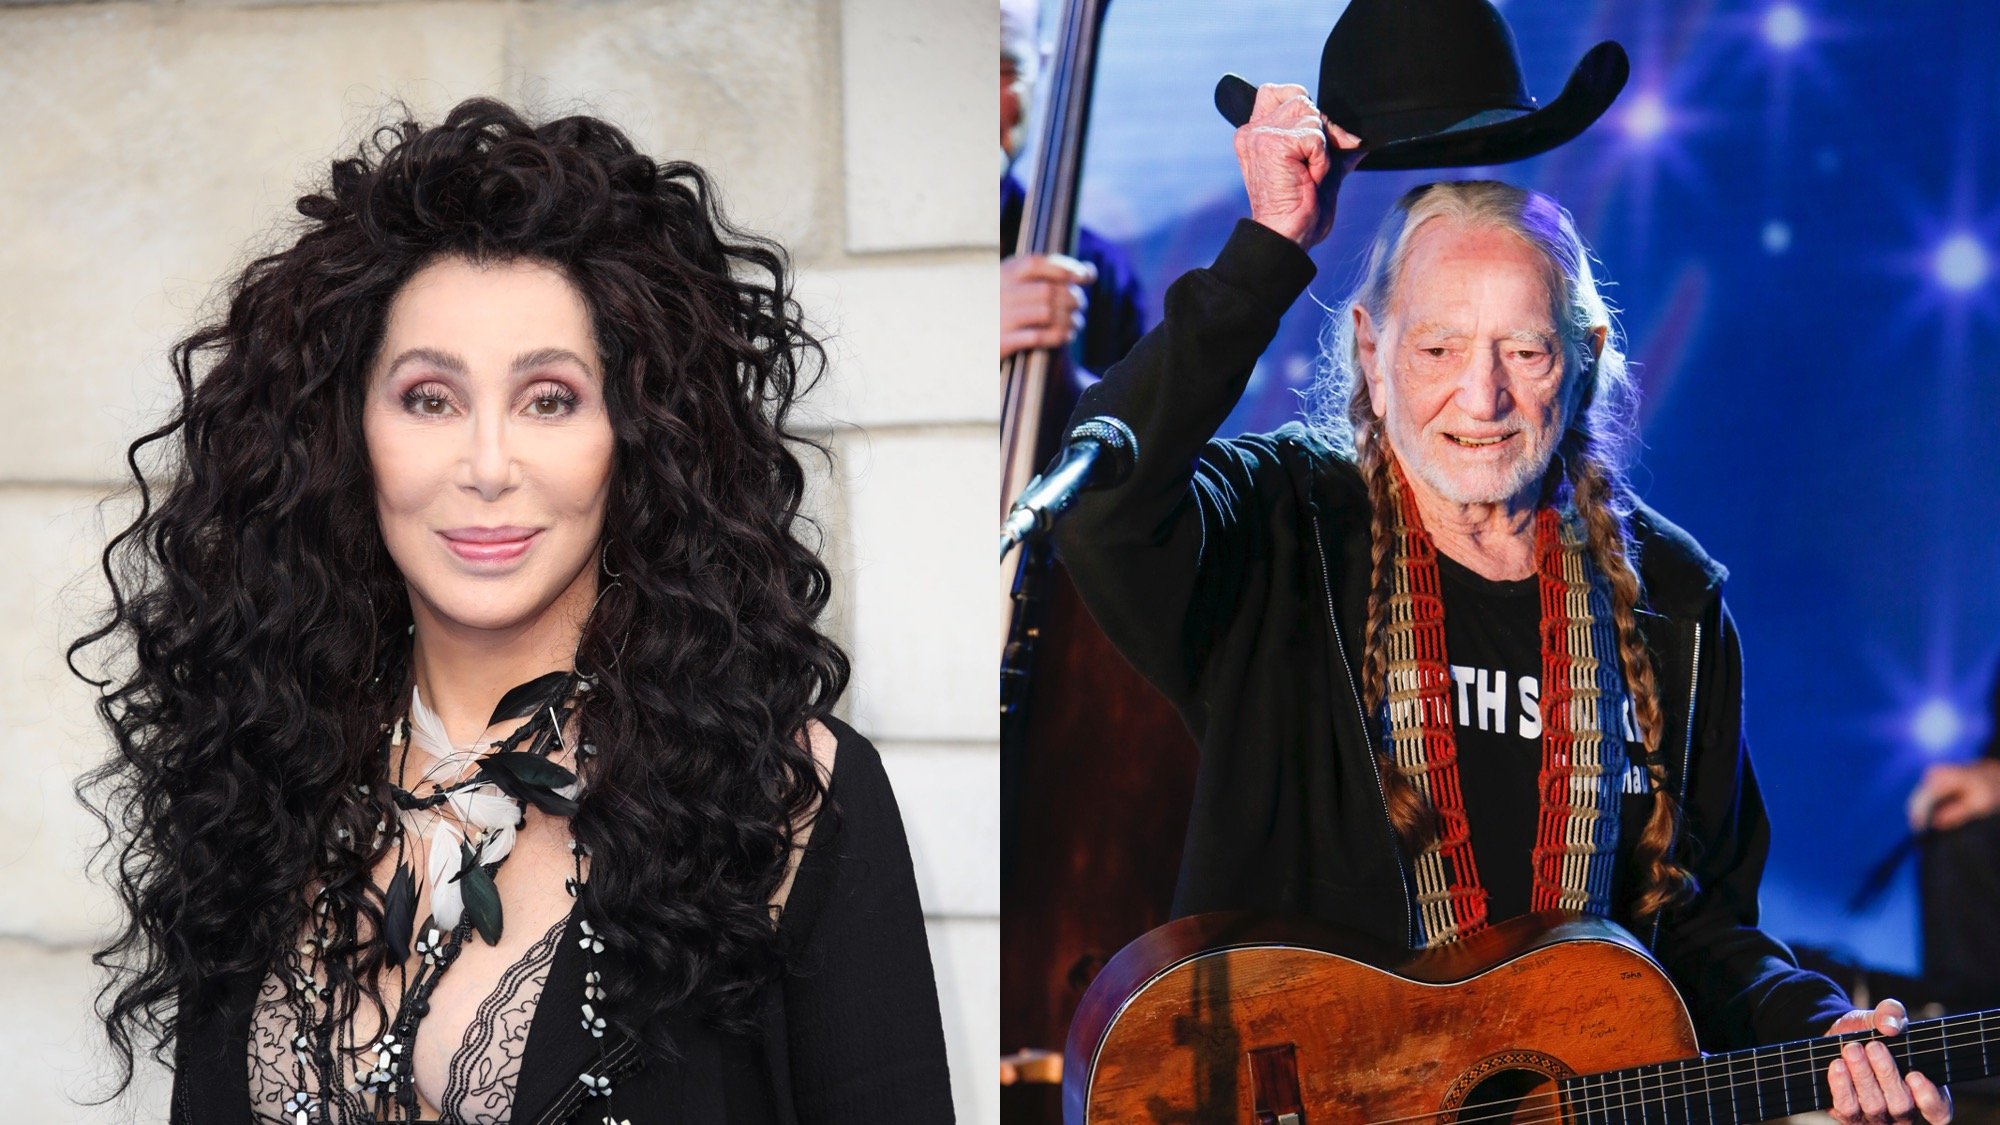 (L) Cher attends the UK Premiere of "Mamma Mia! Here We Go Again" at Eventim Apollo on July 16, 2018 in London, England. (R) Willie Nelson on "Jimmy Kimmel Live!" in 2018.